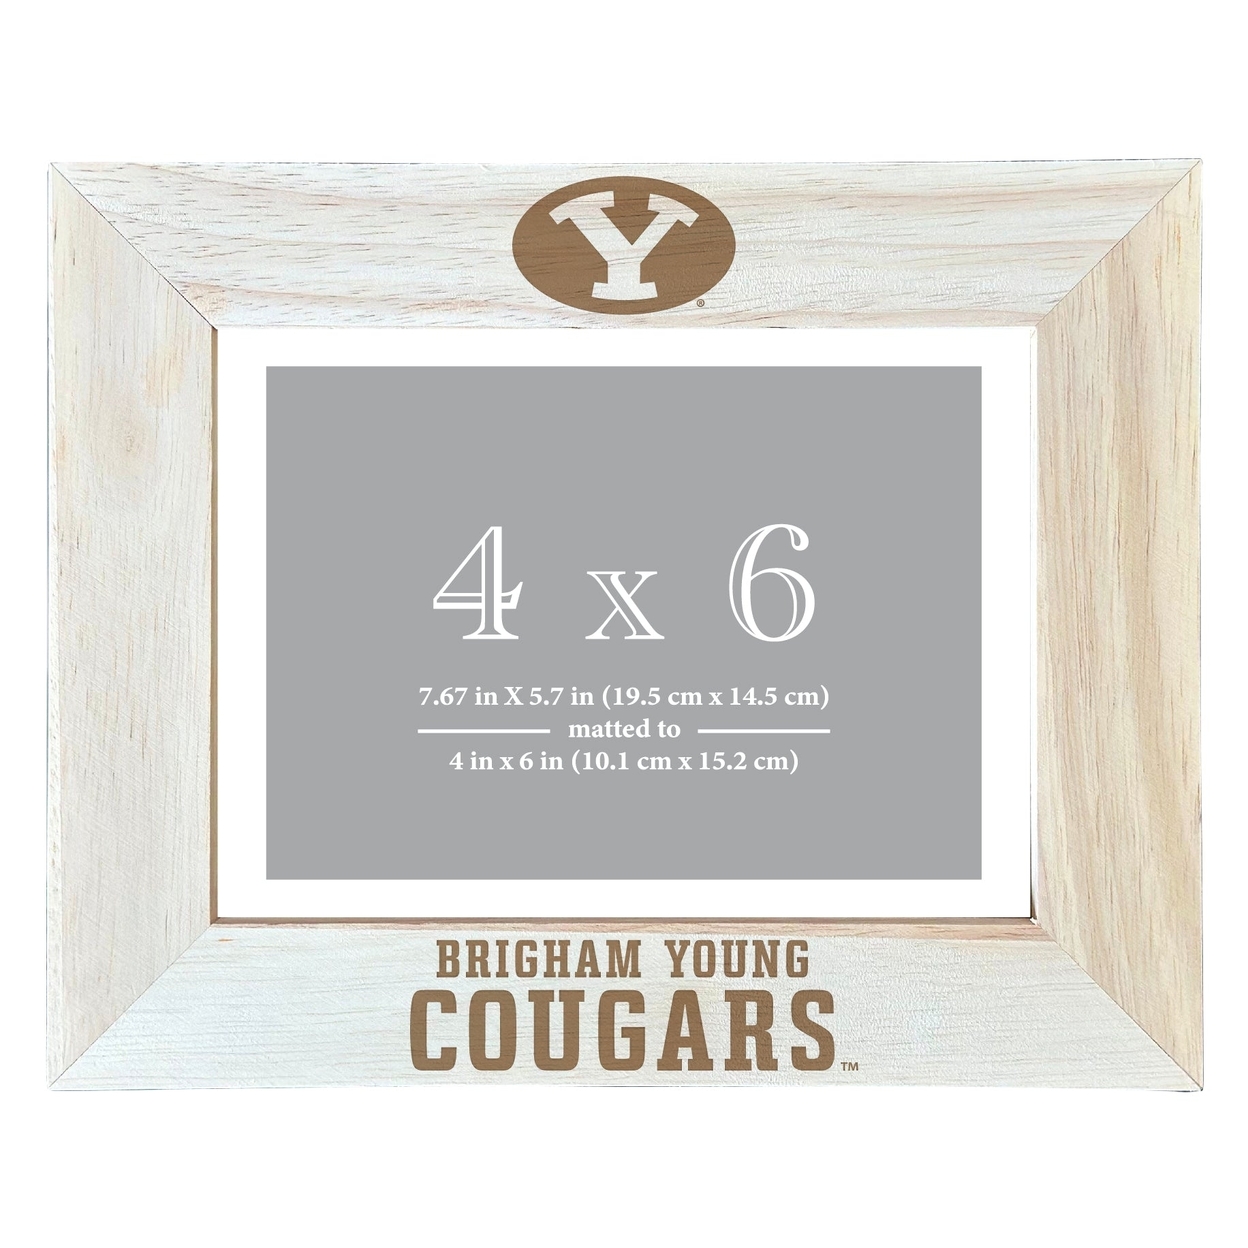 Brigham Young Cougars Wooden Photo Frame Matted To 4 X 6 Inch - Etched